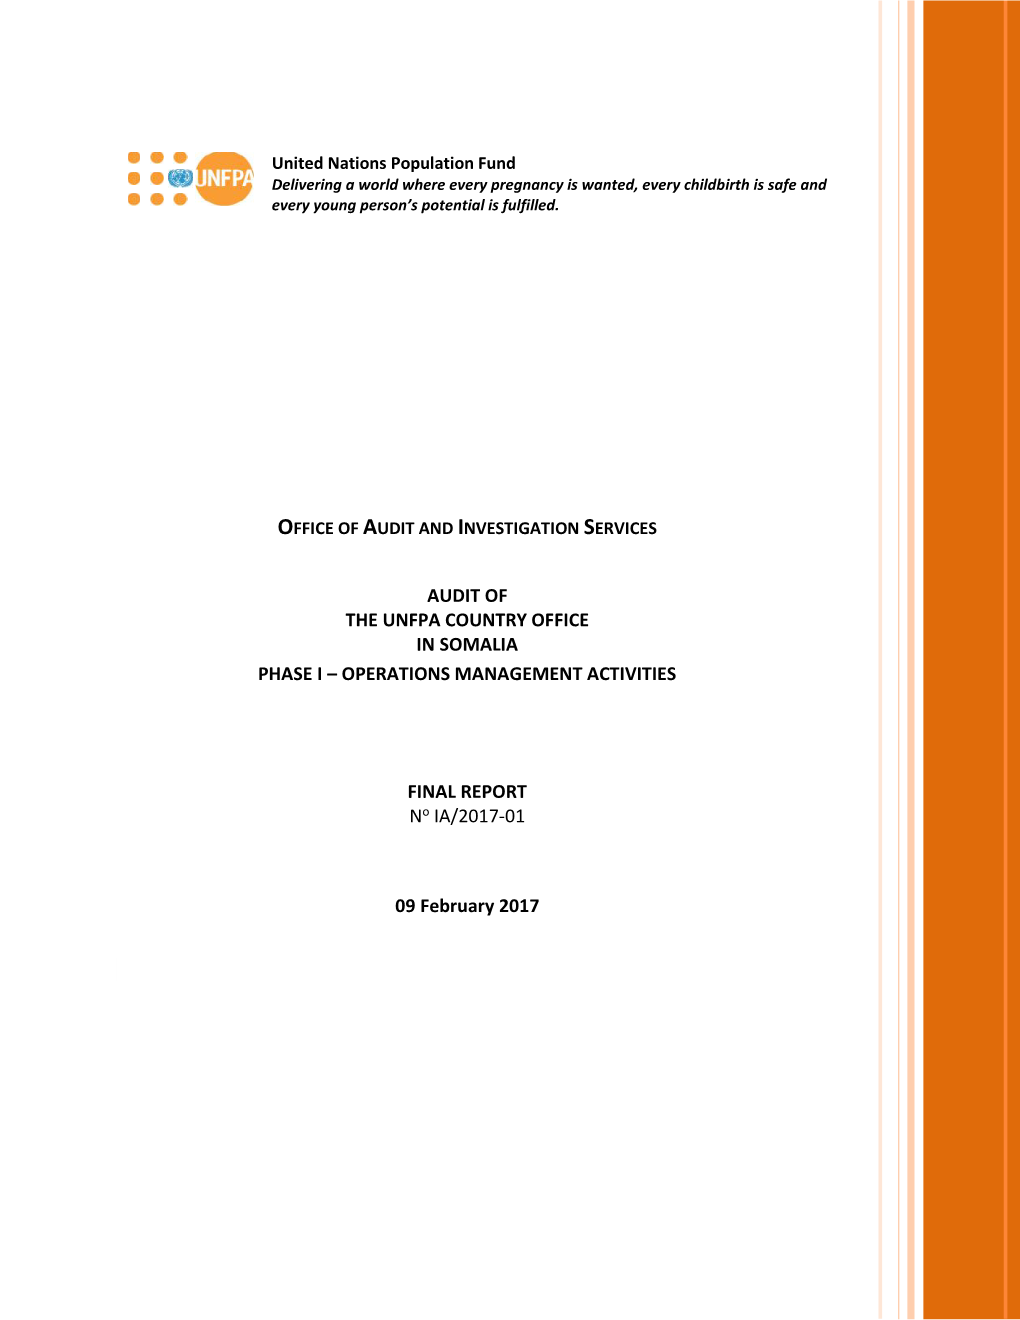 Audit of the Unfpa Country Office in Somalia Phase I – Operations Management Activities